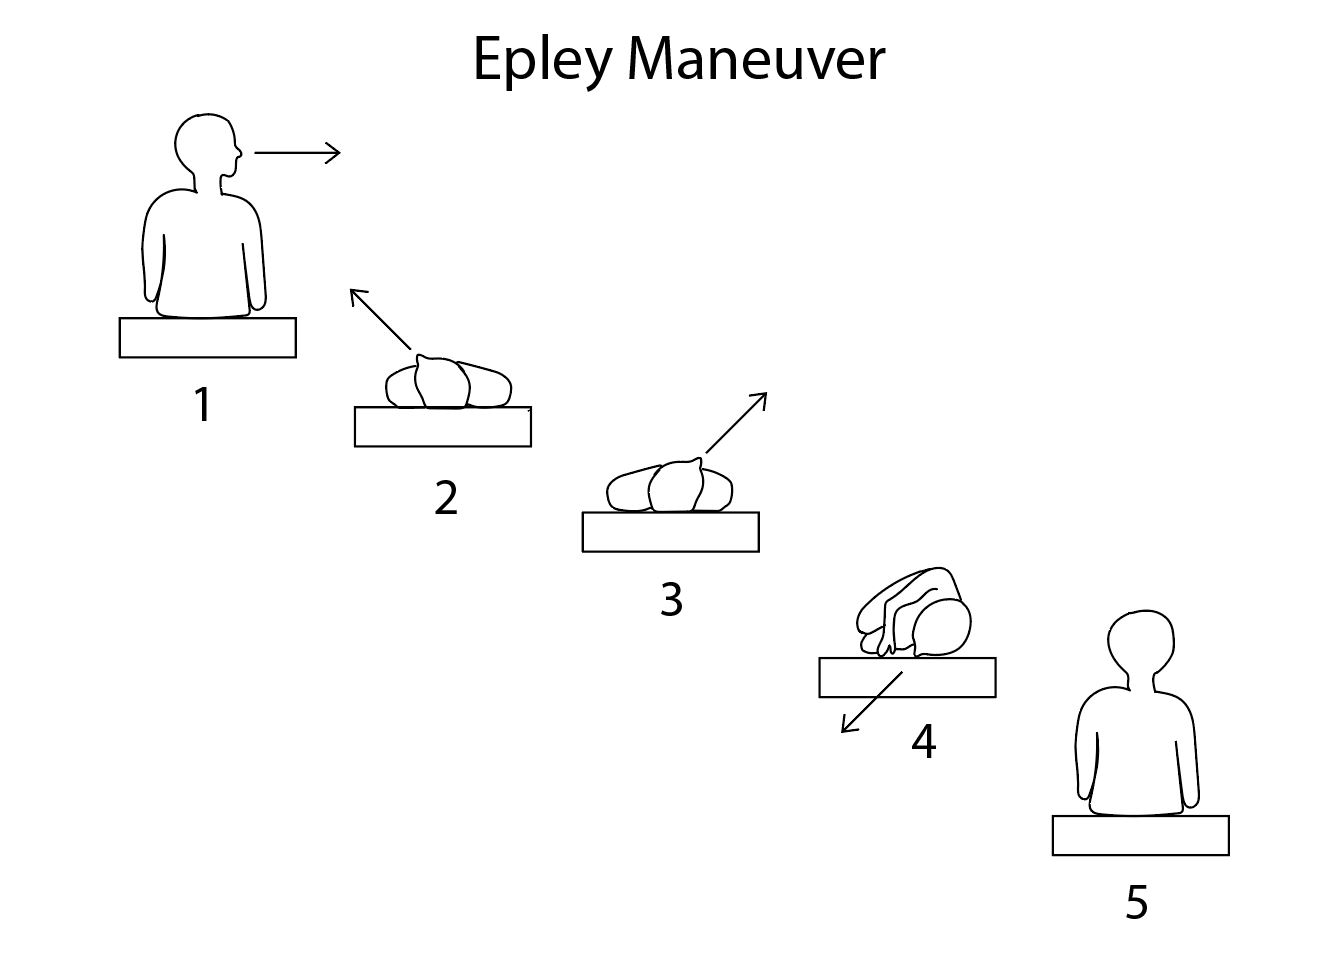 Diagram showing the steps of the Epley maneuver.